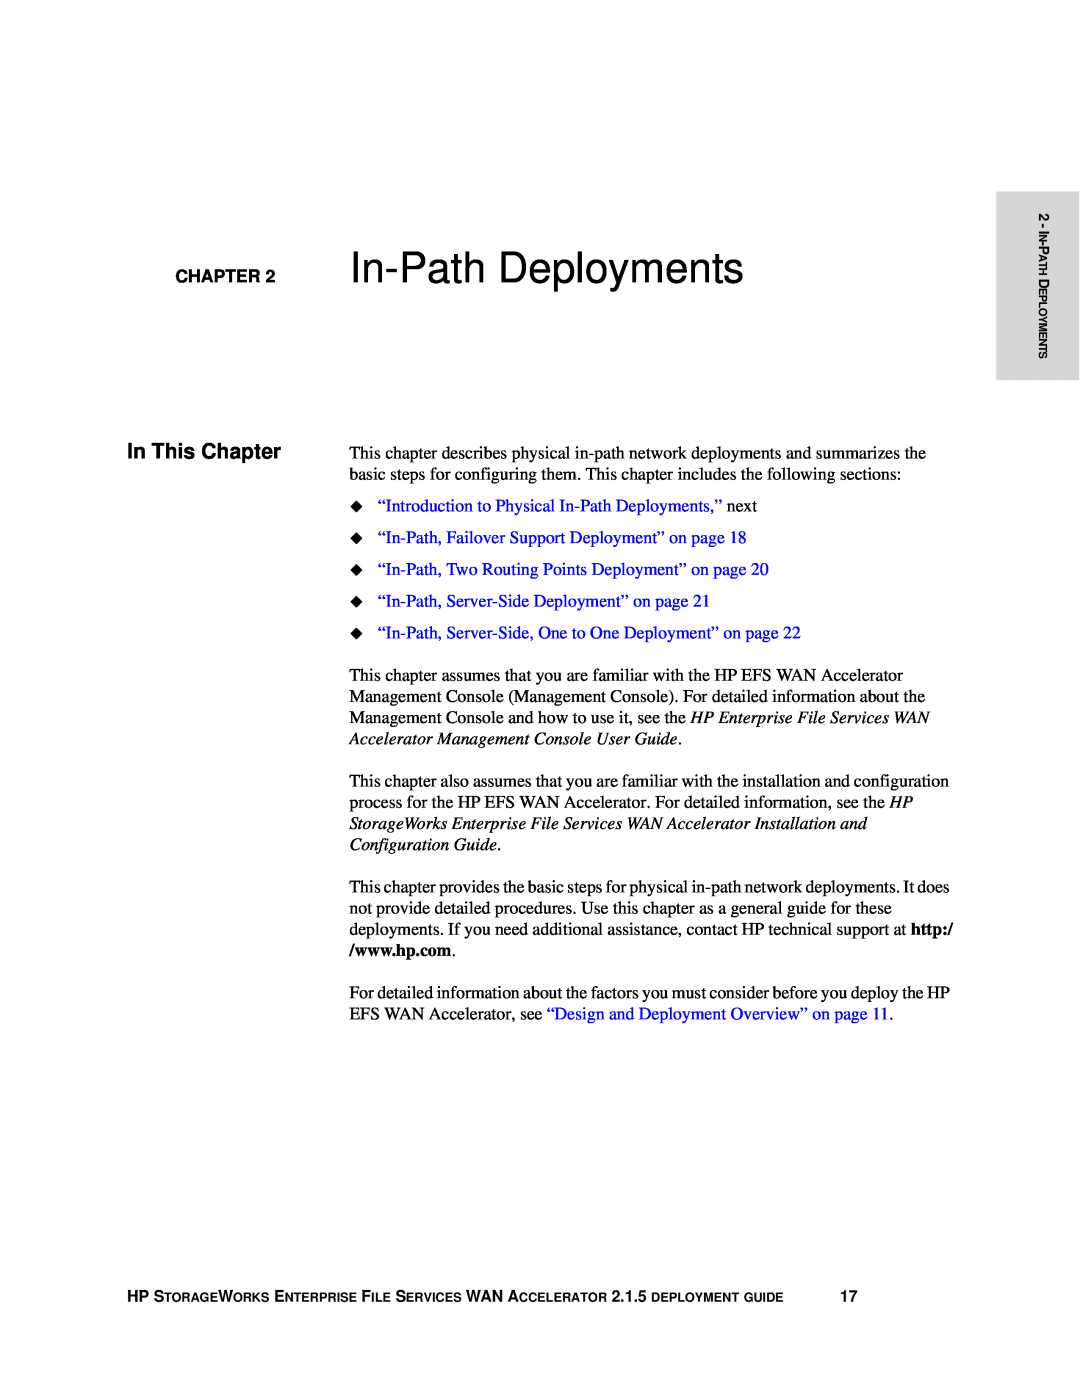 HP Enterprise File Services WAN Accelerator ‹ “Introduction to Physical In-Path Deployments,” next, In This Chapter 